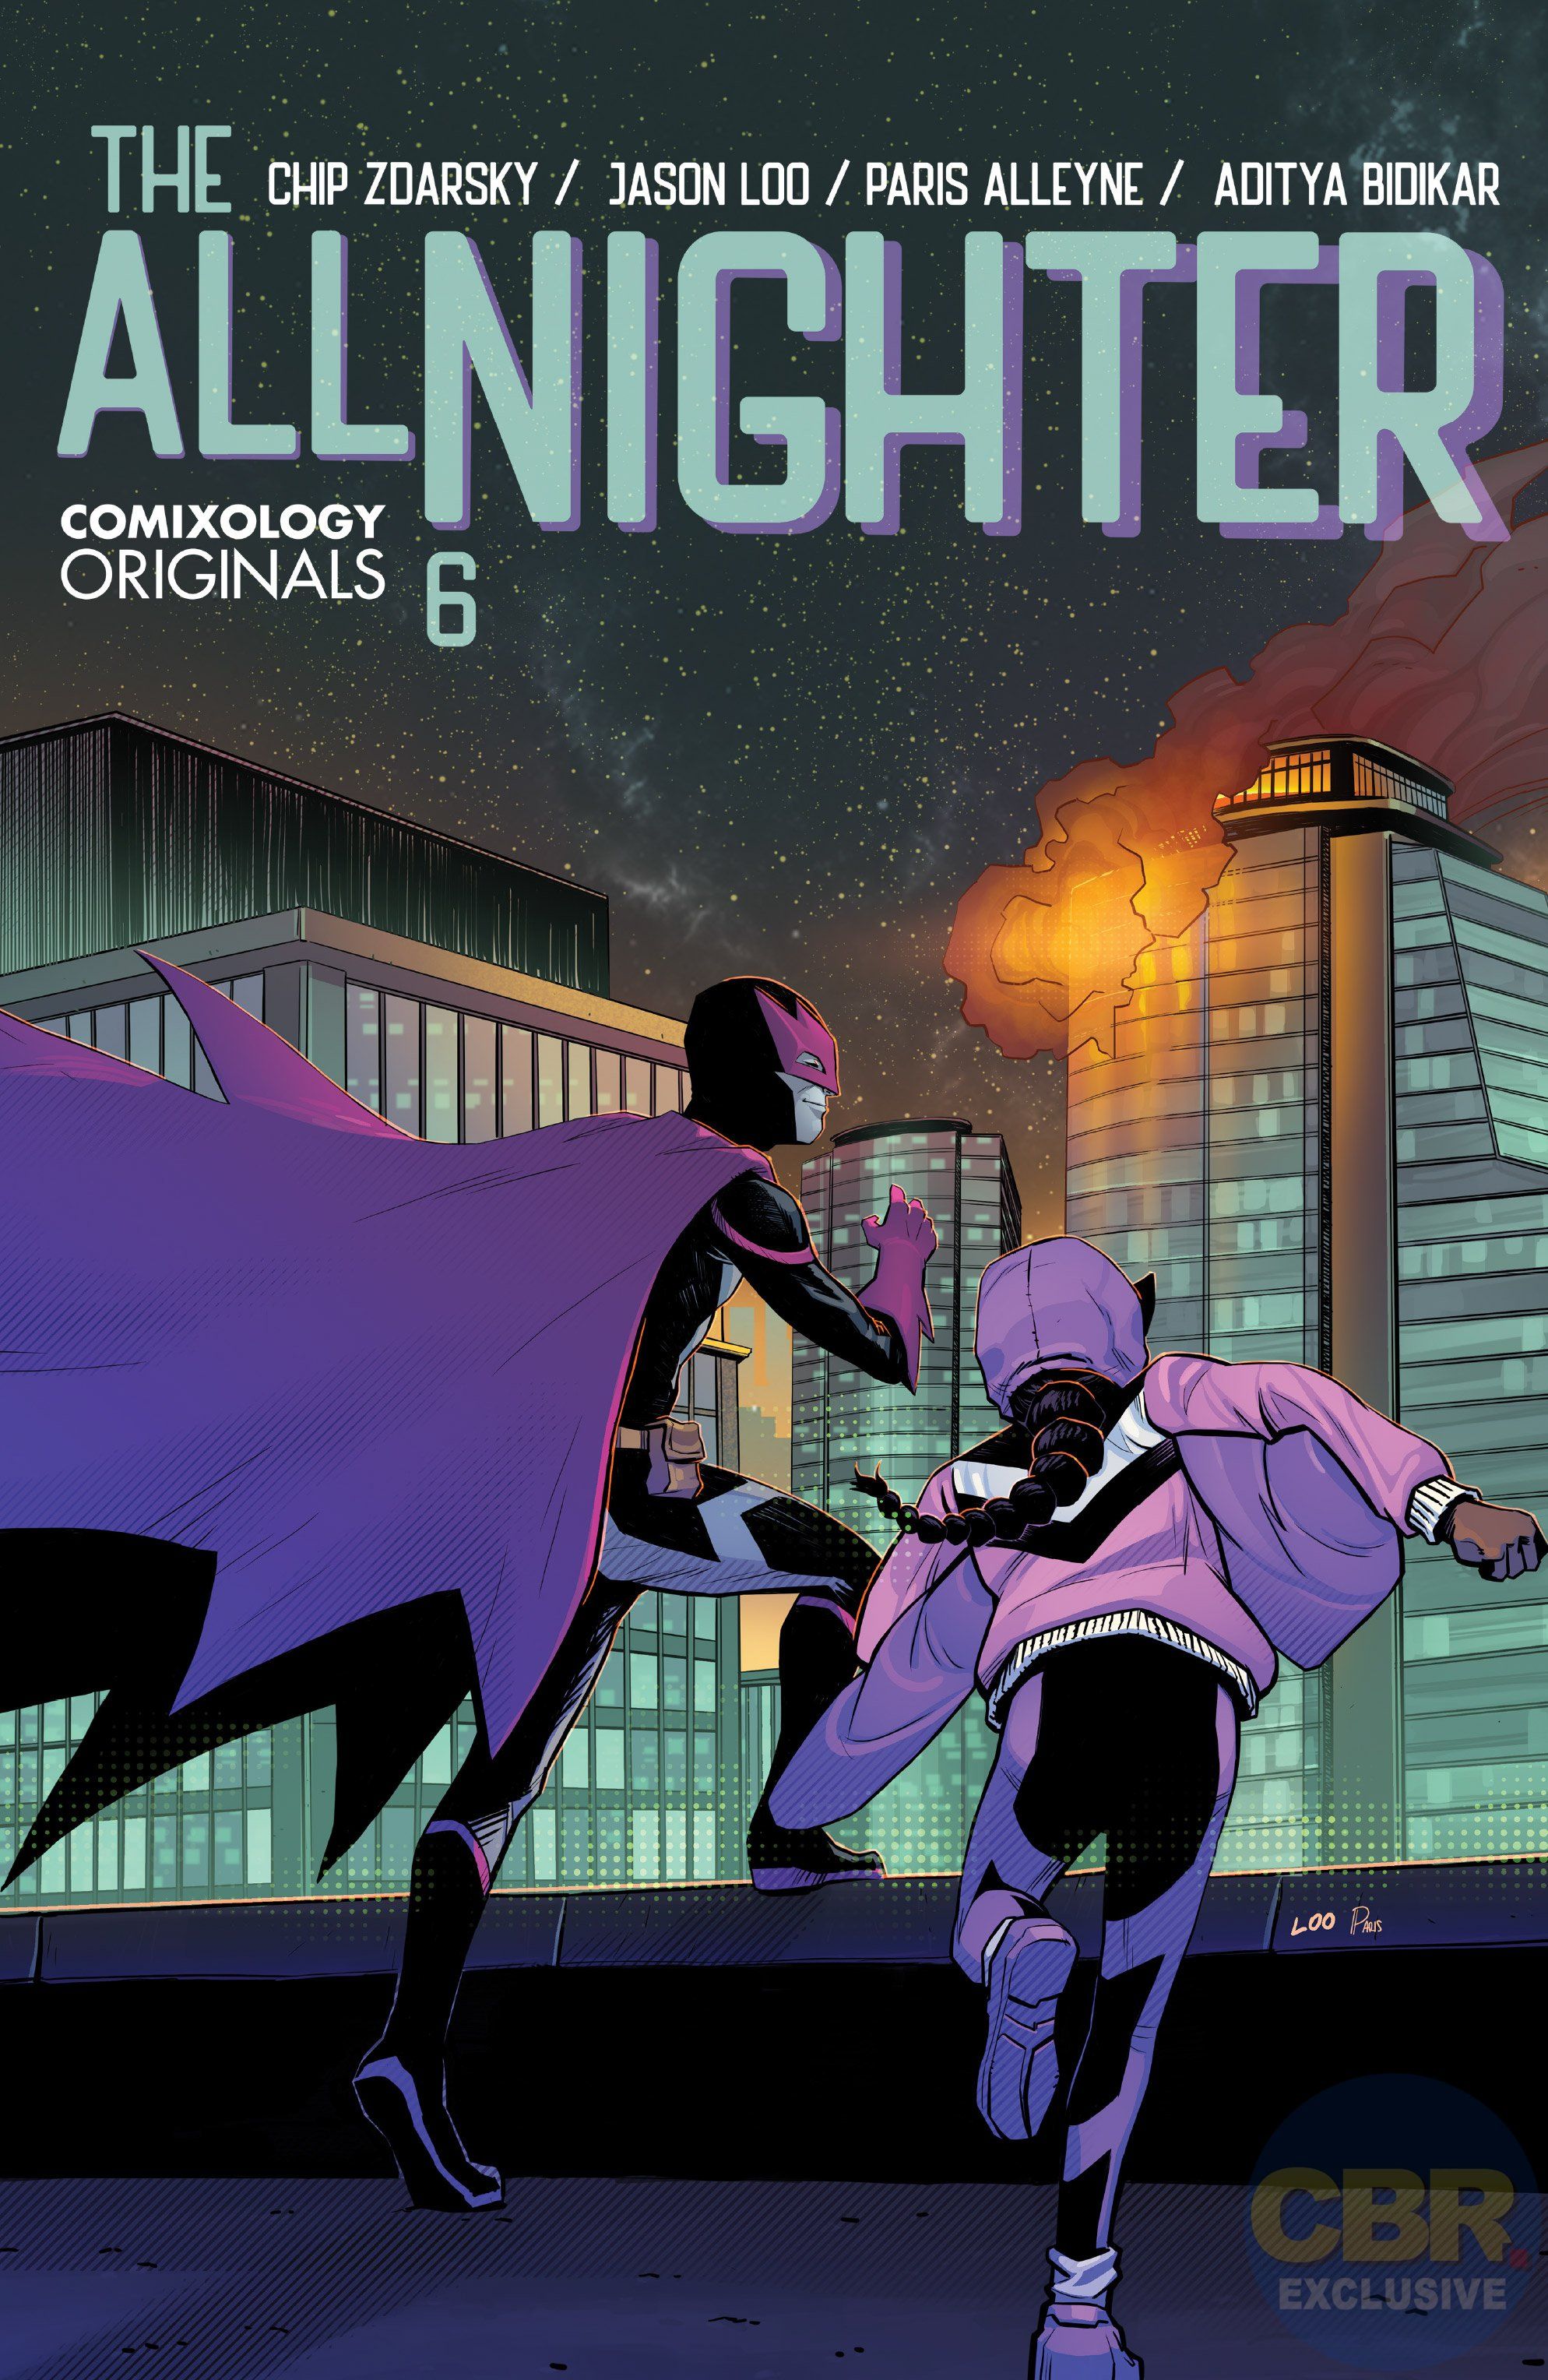 EXCLUSIVE: Chip Zdarsky’s All-Nighter Returns With Vampires, Superheroes and More